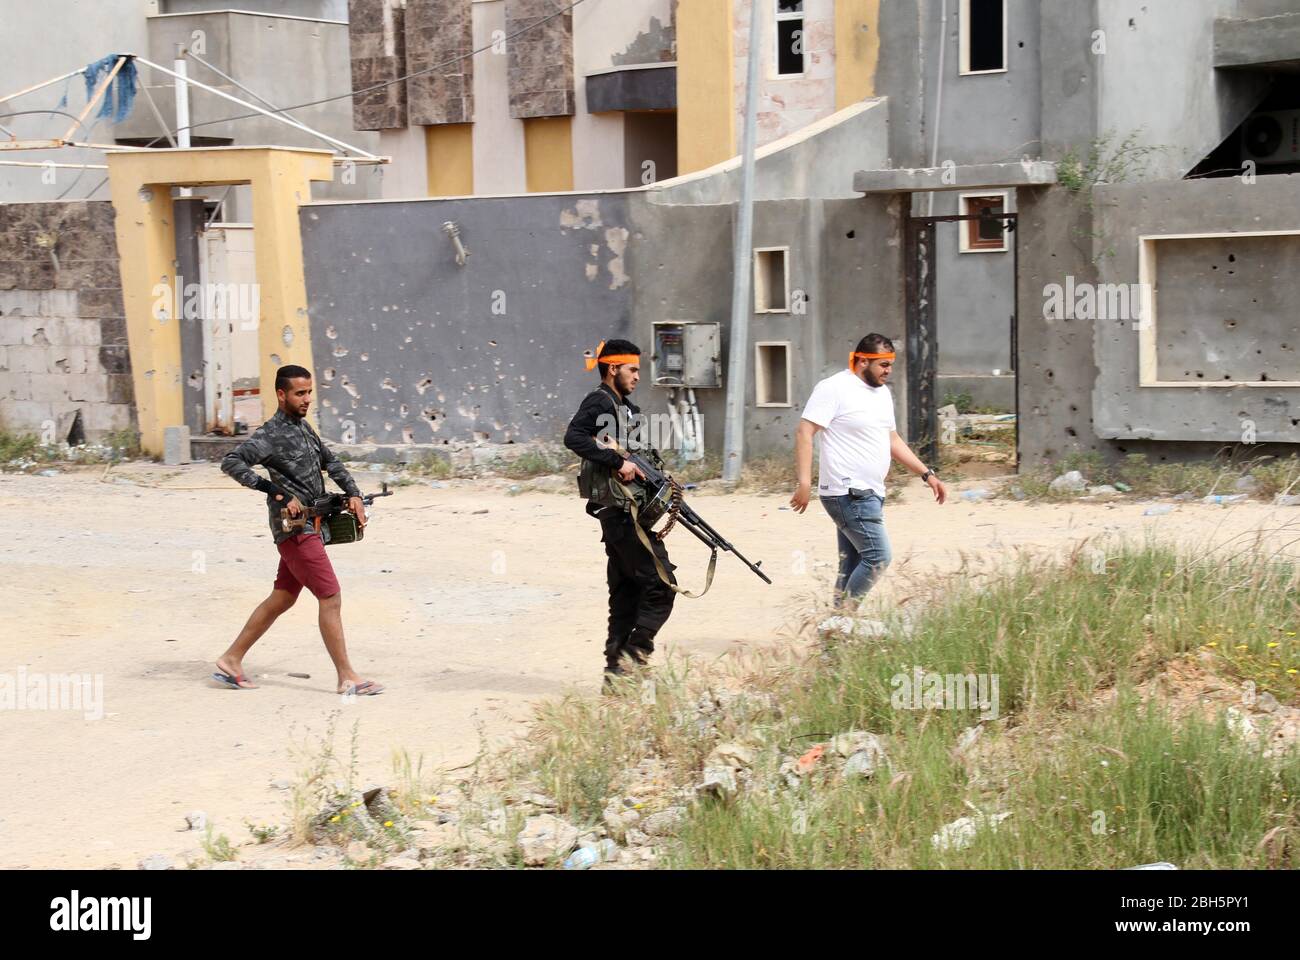 Tripoli, Libya. 23rd Apr, 2020. Fighters of the UN-backed Government of National Accord (GNA) are seen in Tripoli, Libya, April 23, 2020. The east-based army has been leading a military campaign since early this month in and around the Libyan capital of Tripoli to take over the city and topple the UN-backed government. Despite international call for cease fire in Libya, the deadly armed conflict has continued with collateral civilian casualties. Credit: Hamza Turkia/Xinhua/Alamy Live News Stock Photo